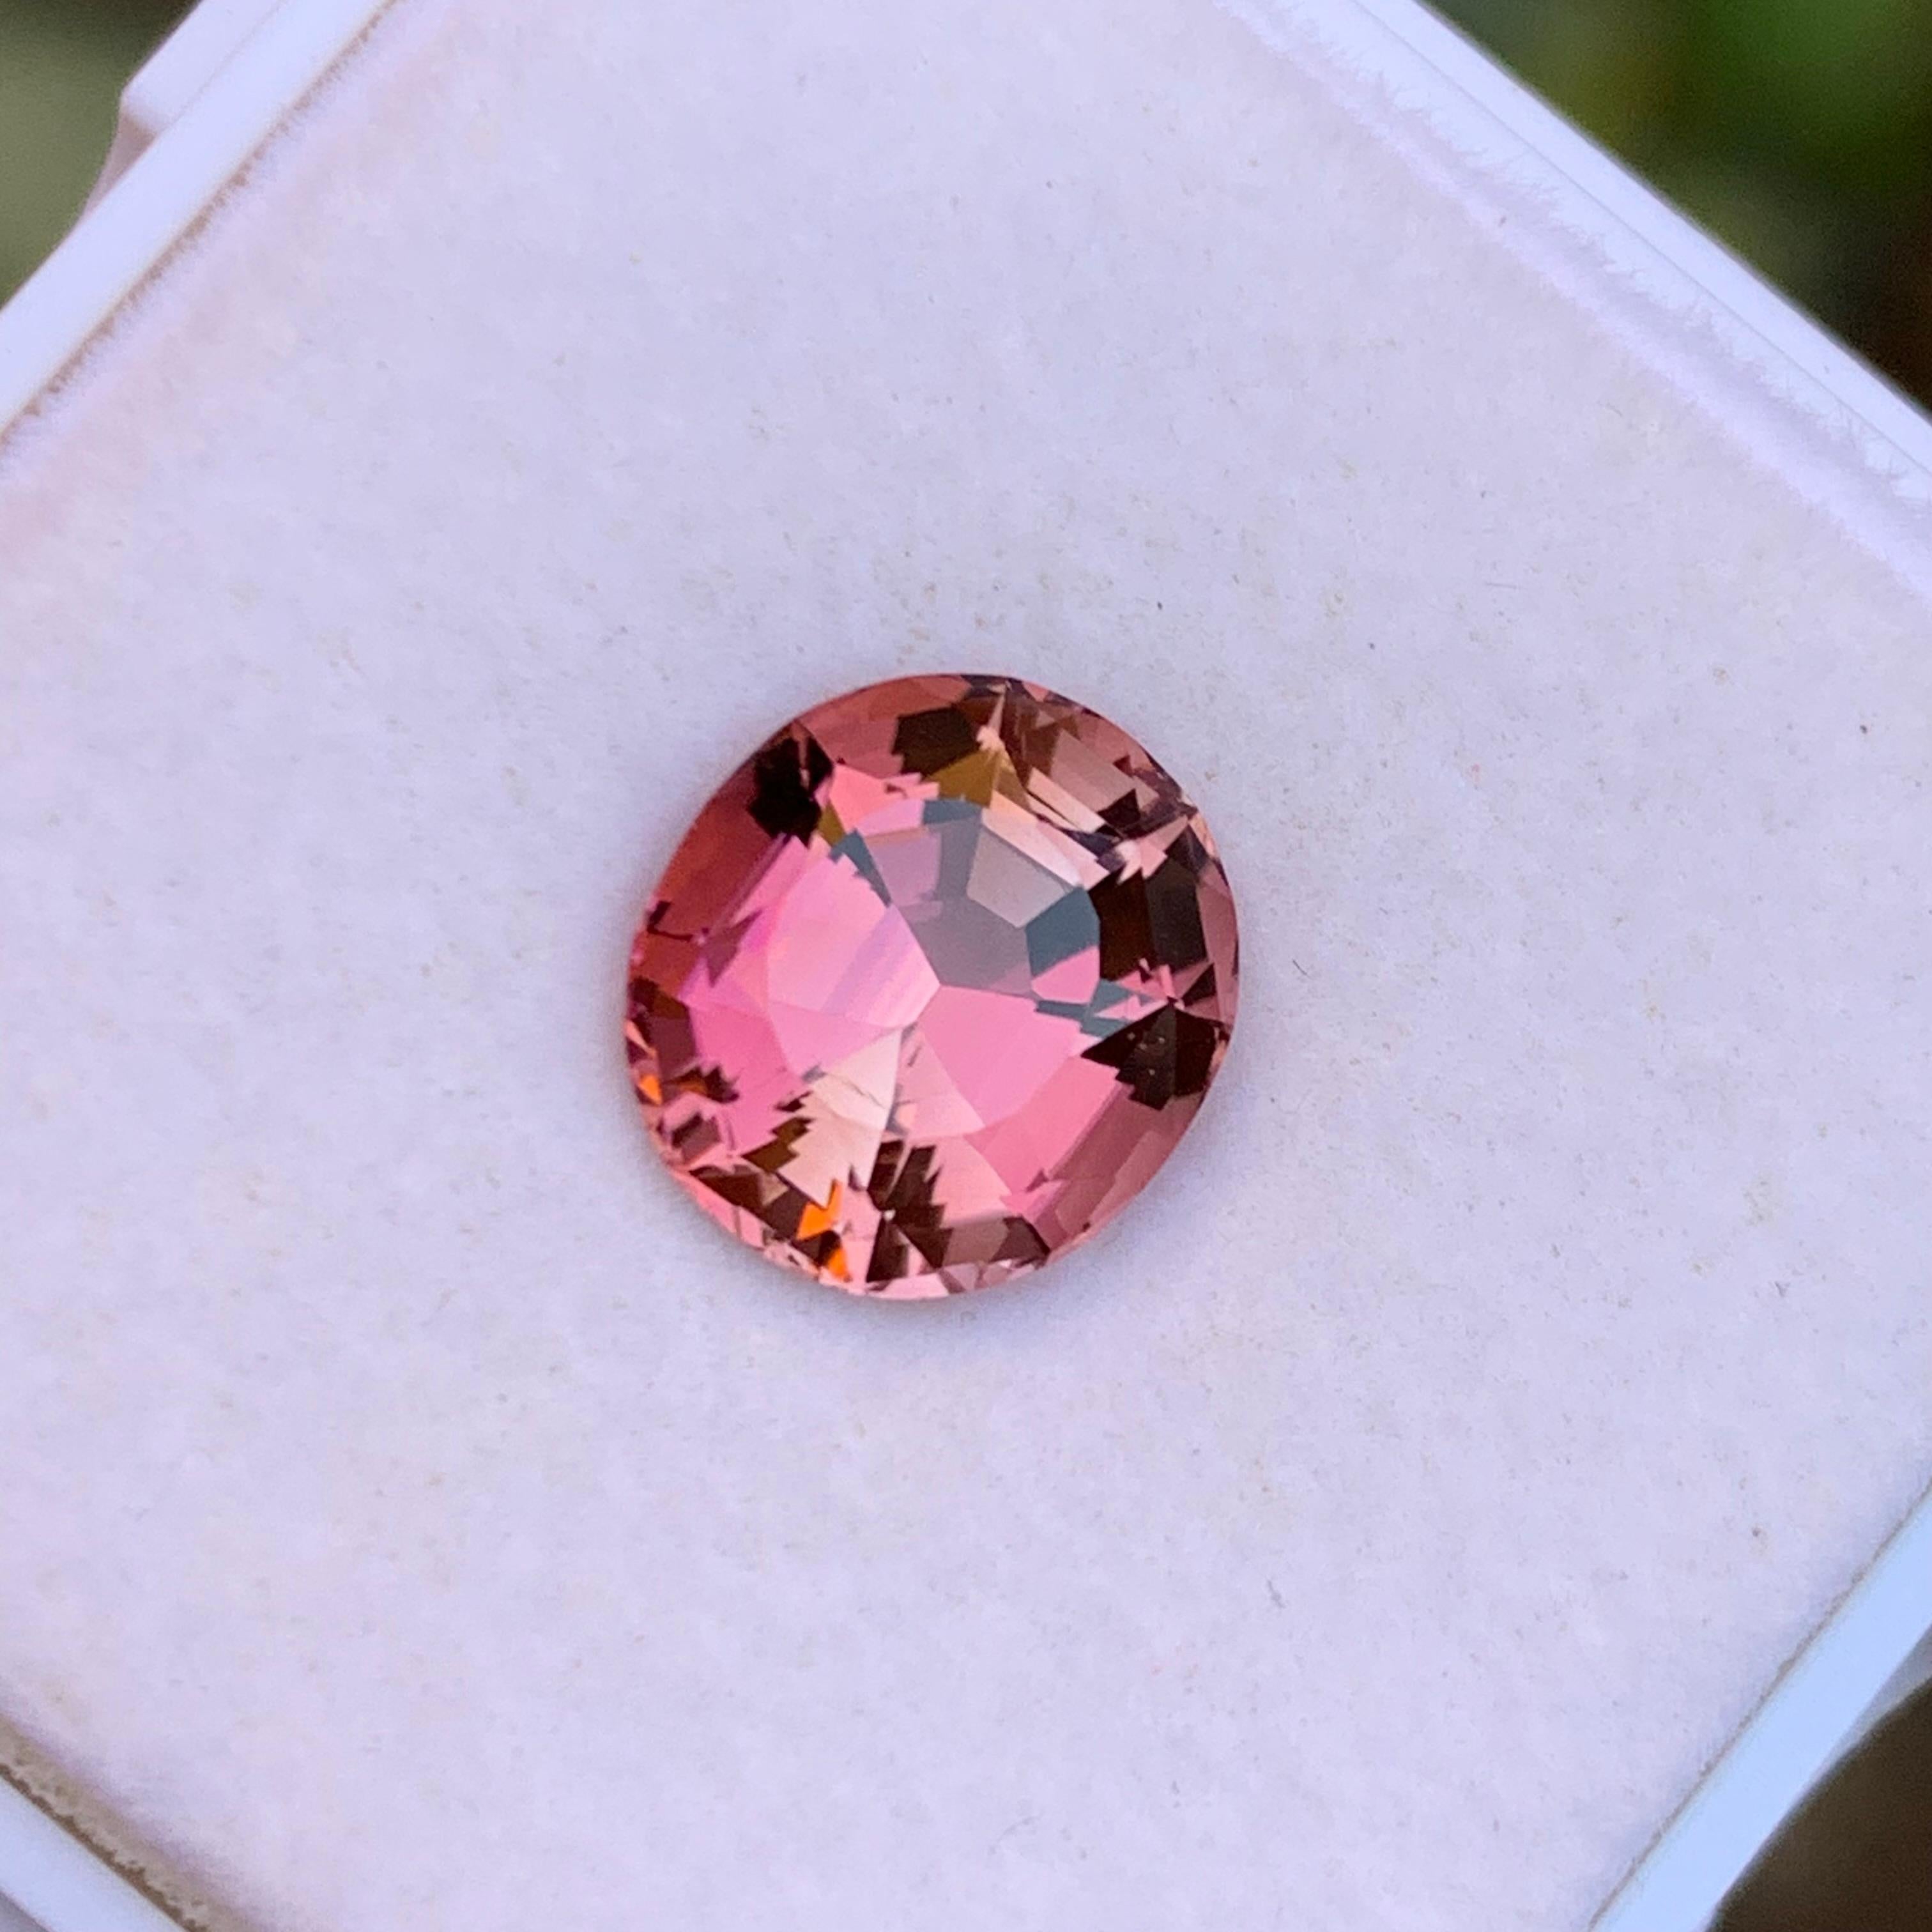 Rare Peachy Pink Natural Tourmaline Gemstone, 3.80 Ct Fancy Cushion Cut for Ring For Sale 2